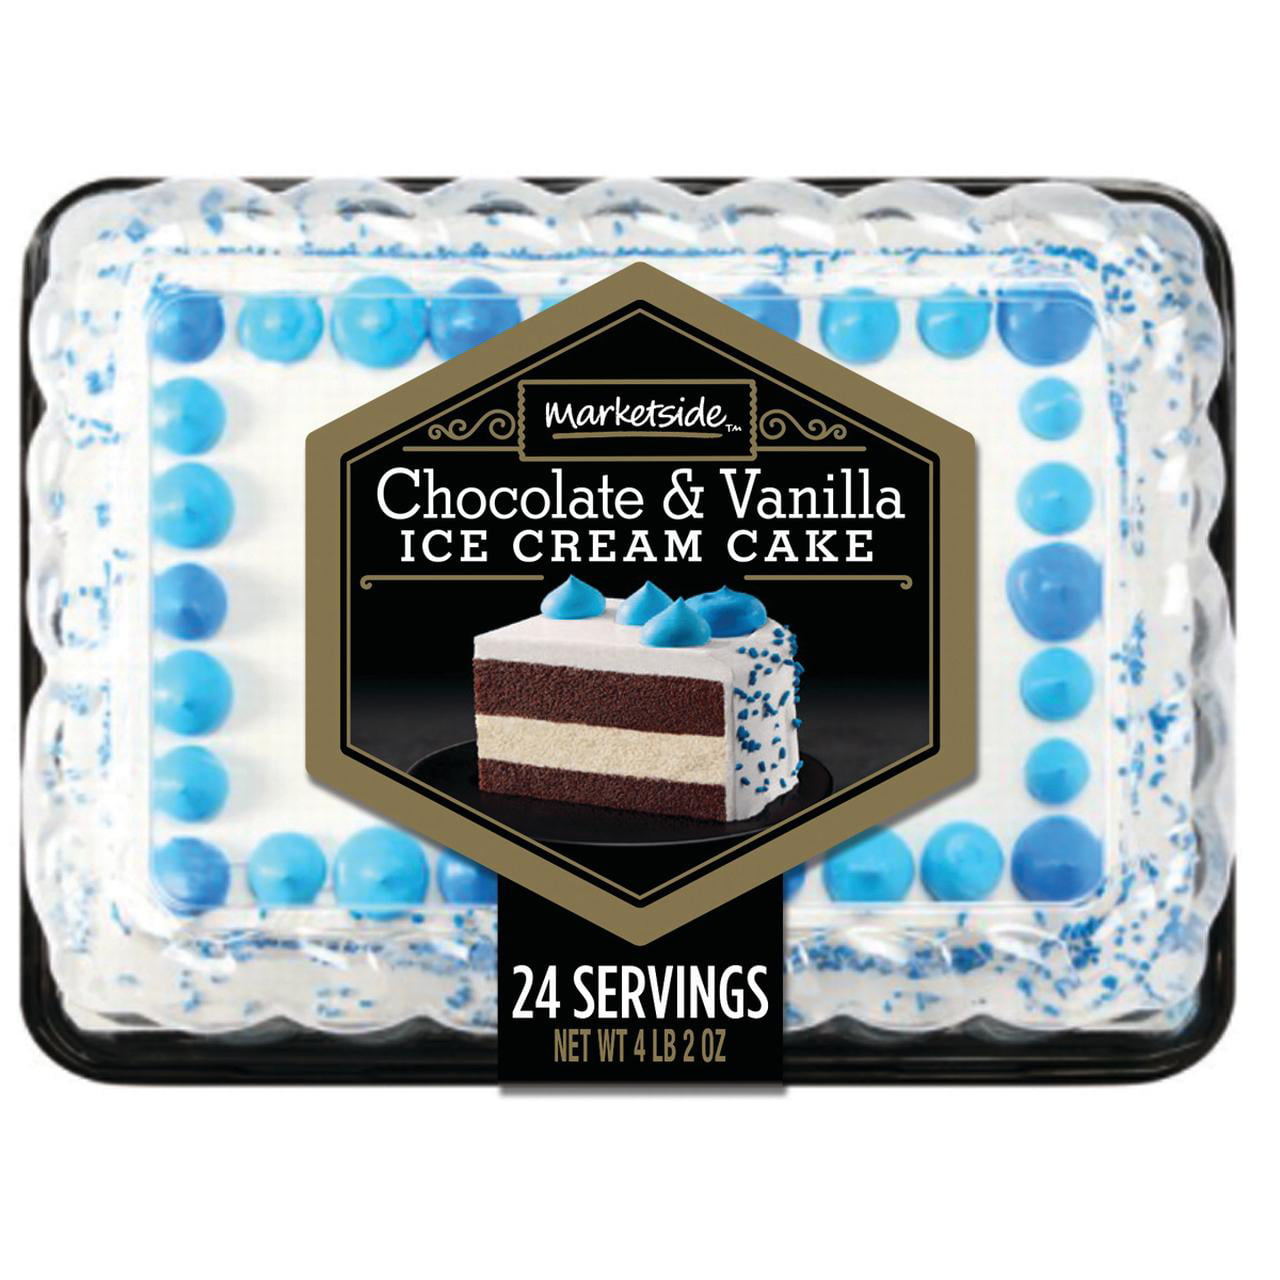 37+ Does Walmart Sell Ice Cream Cakes